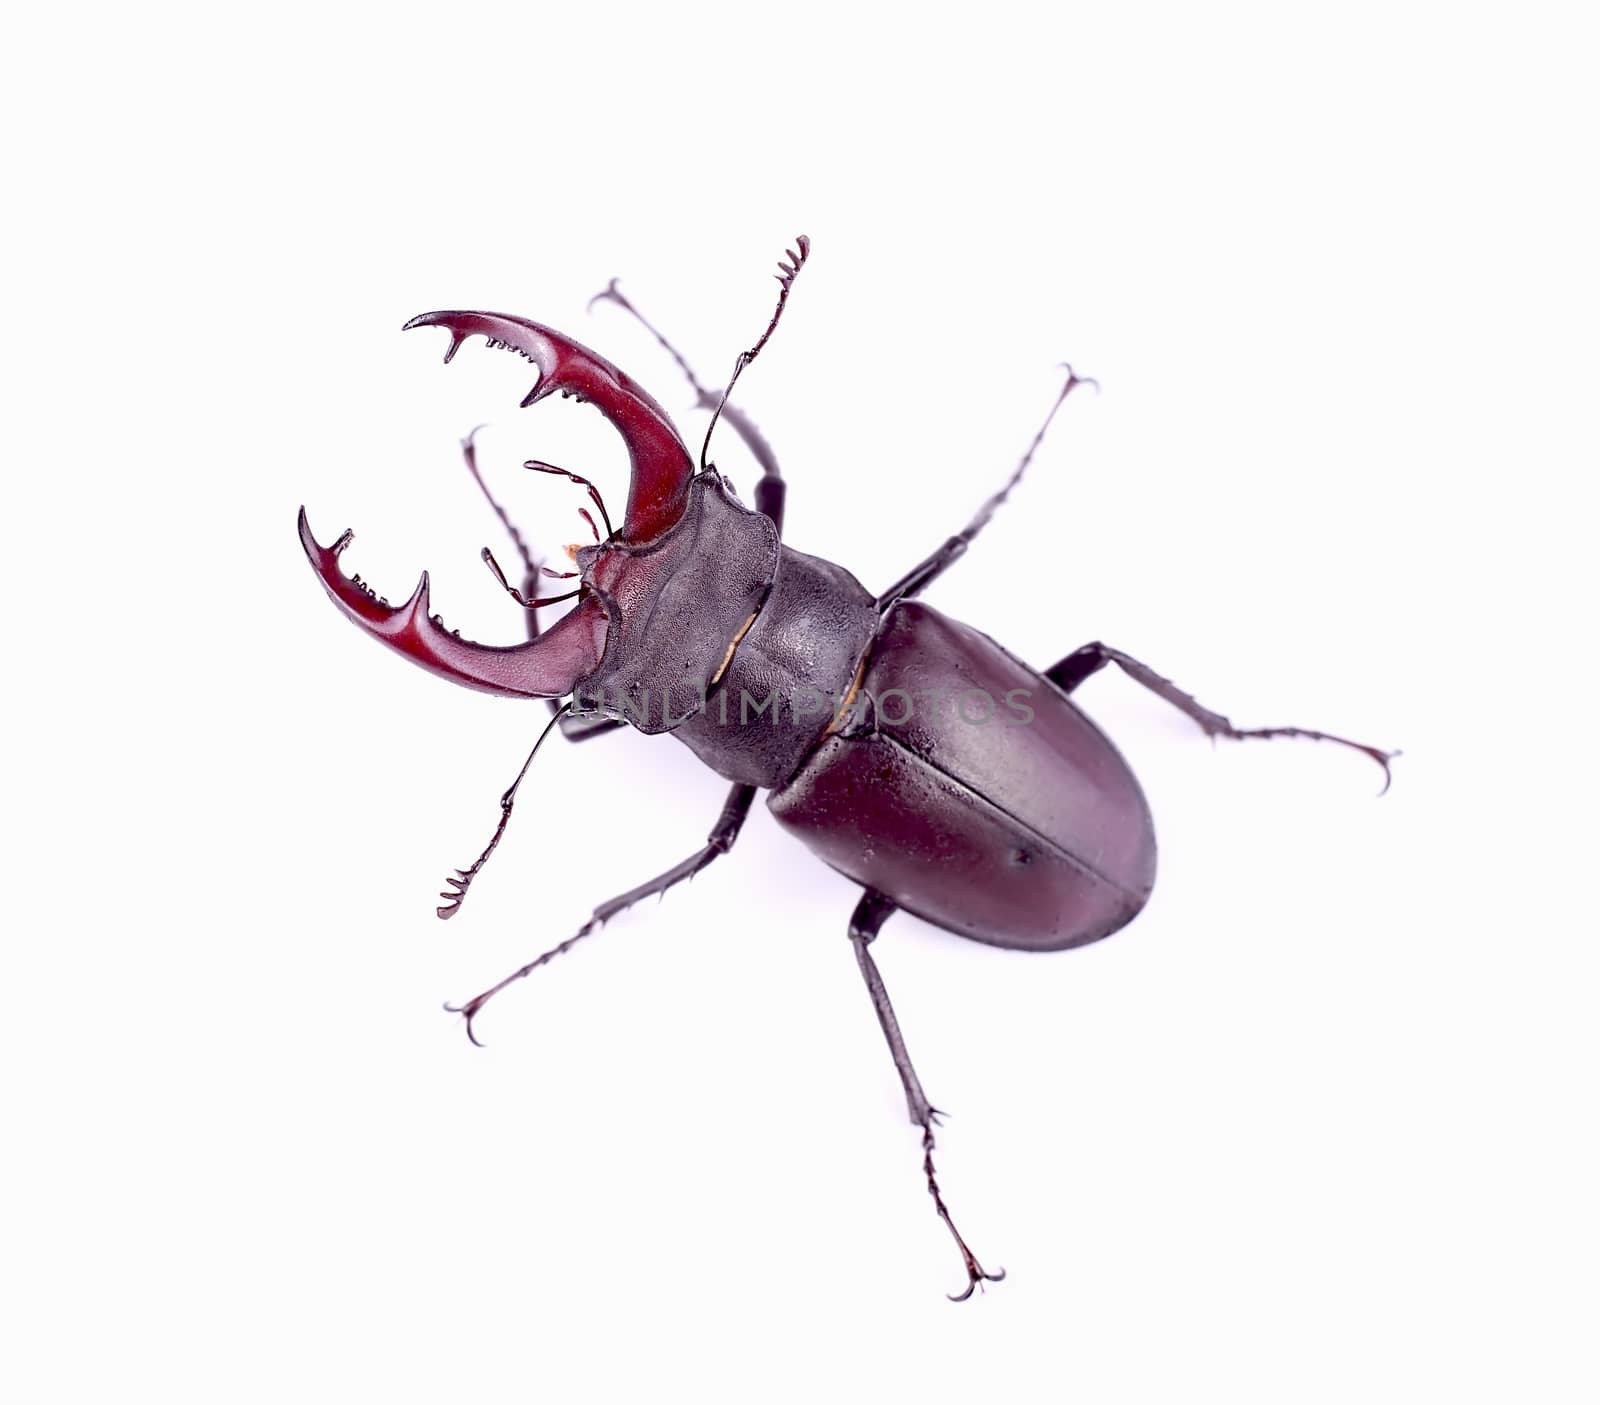 Stag beetle isolated on white background, top view